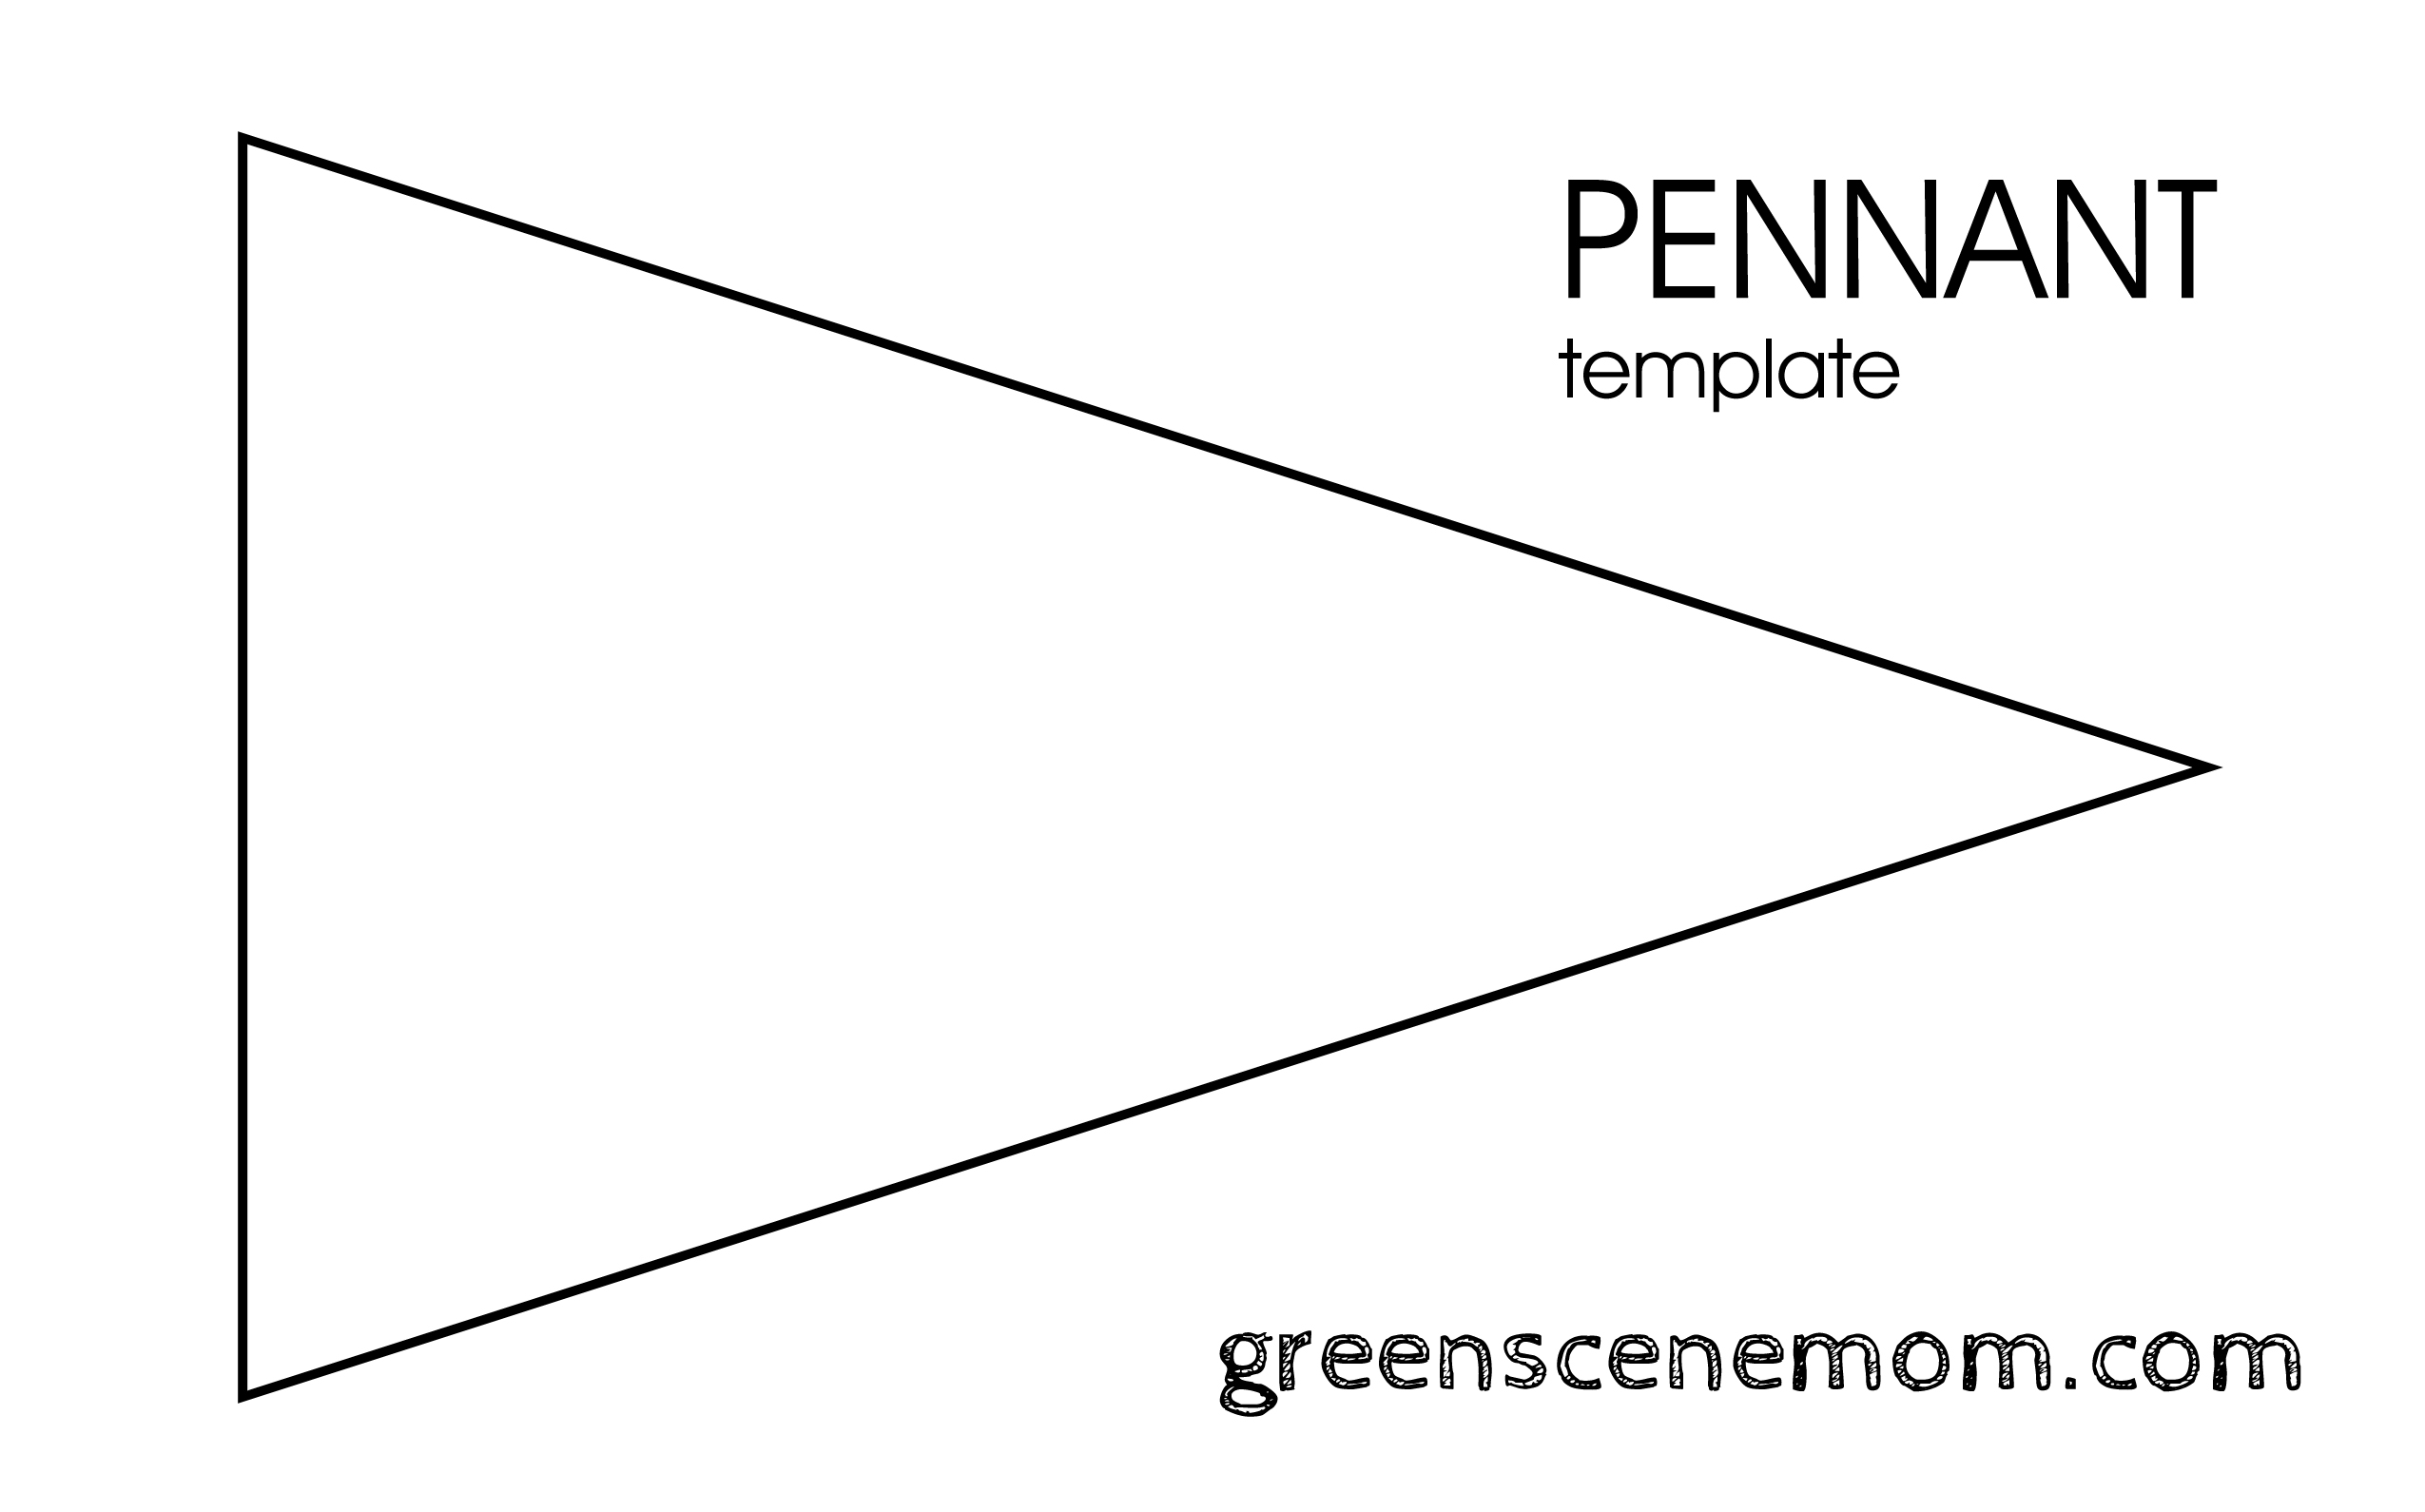 pennant-template